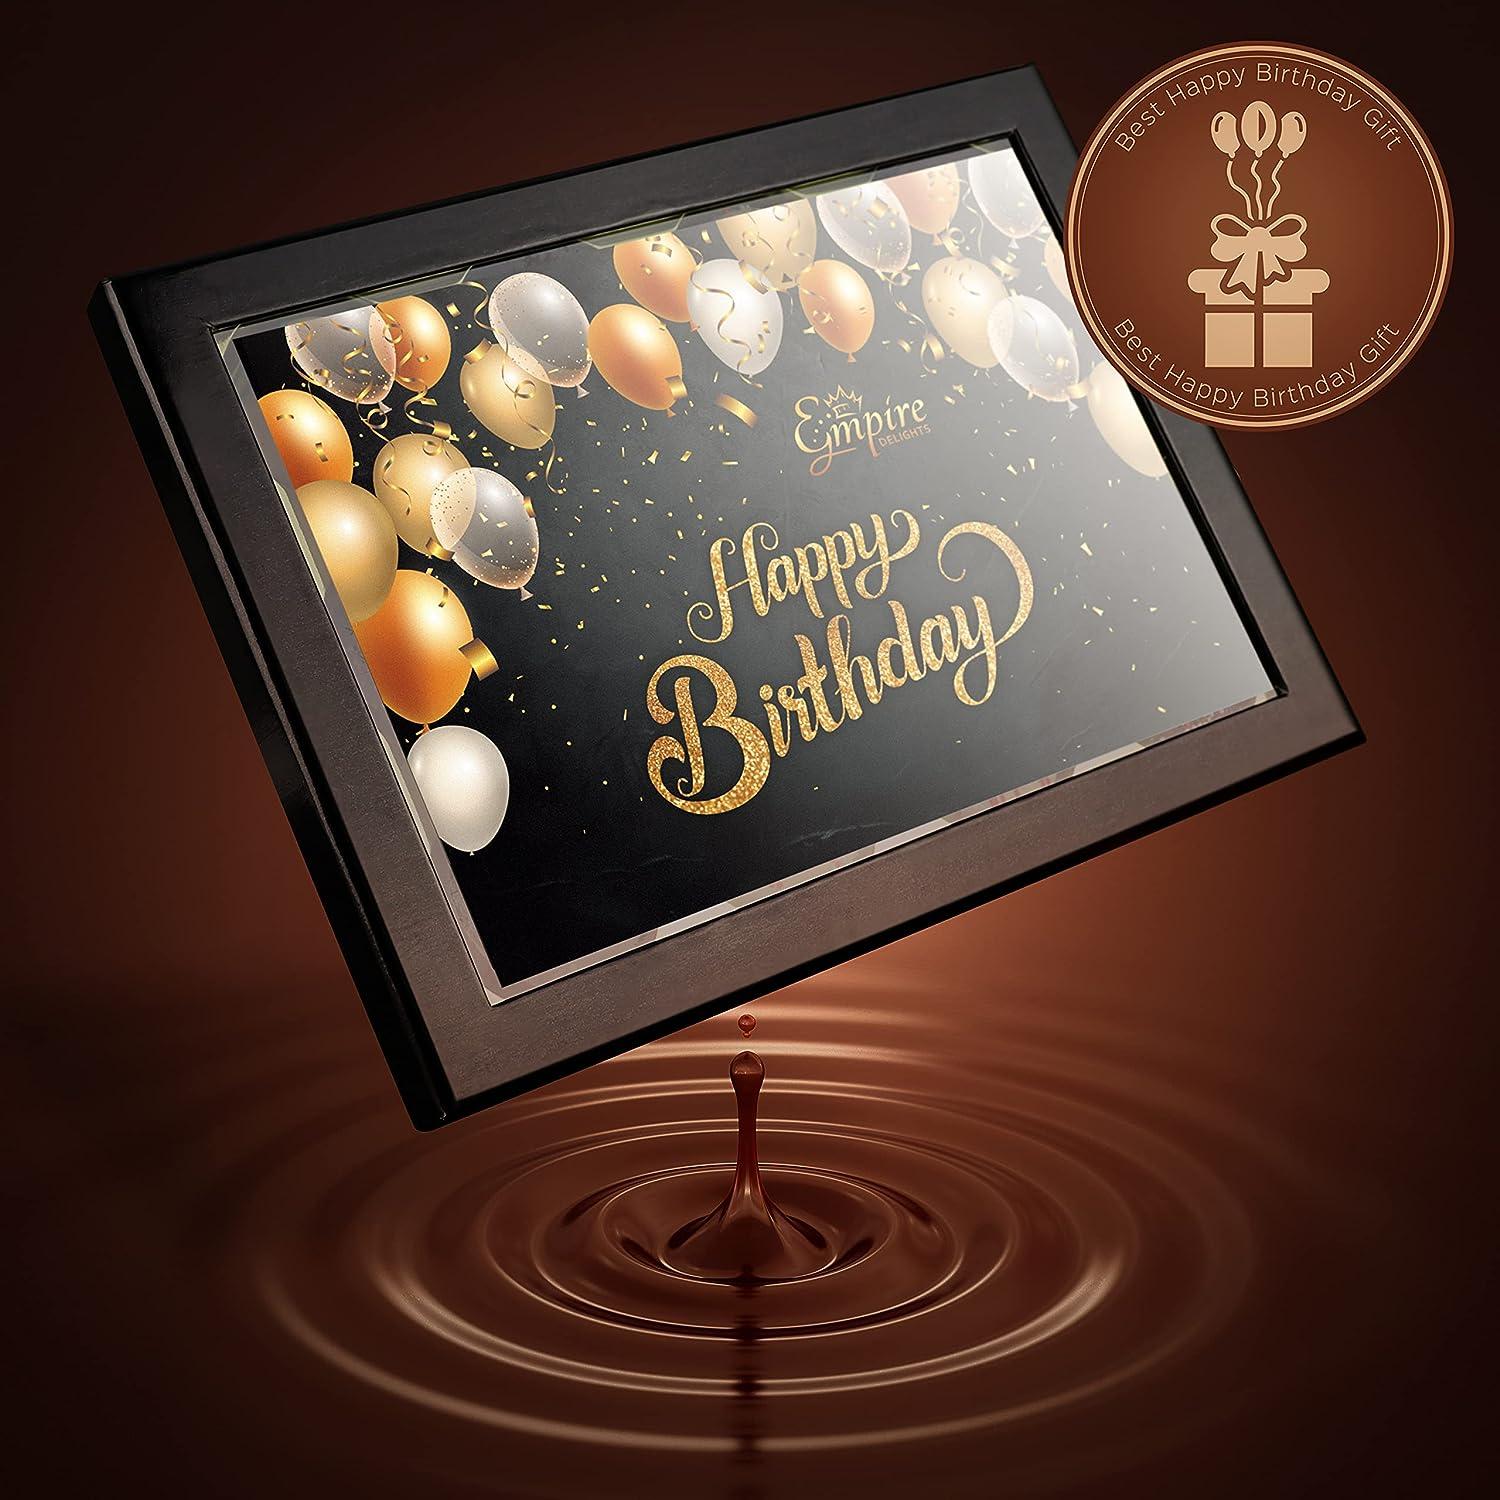 Is Chocolate a Good Birthday Gift? - Totally Chocolate